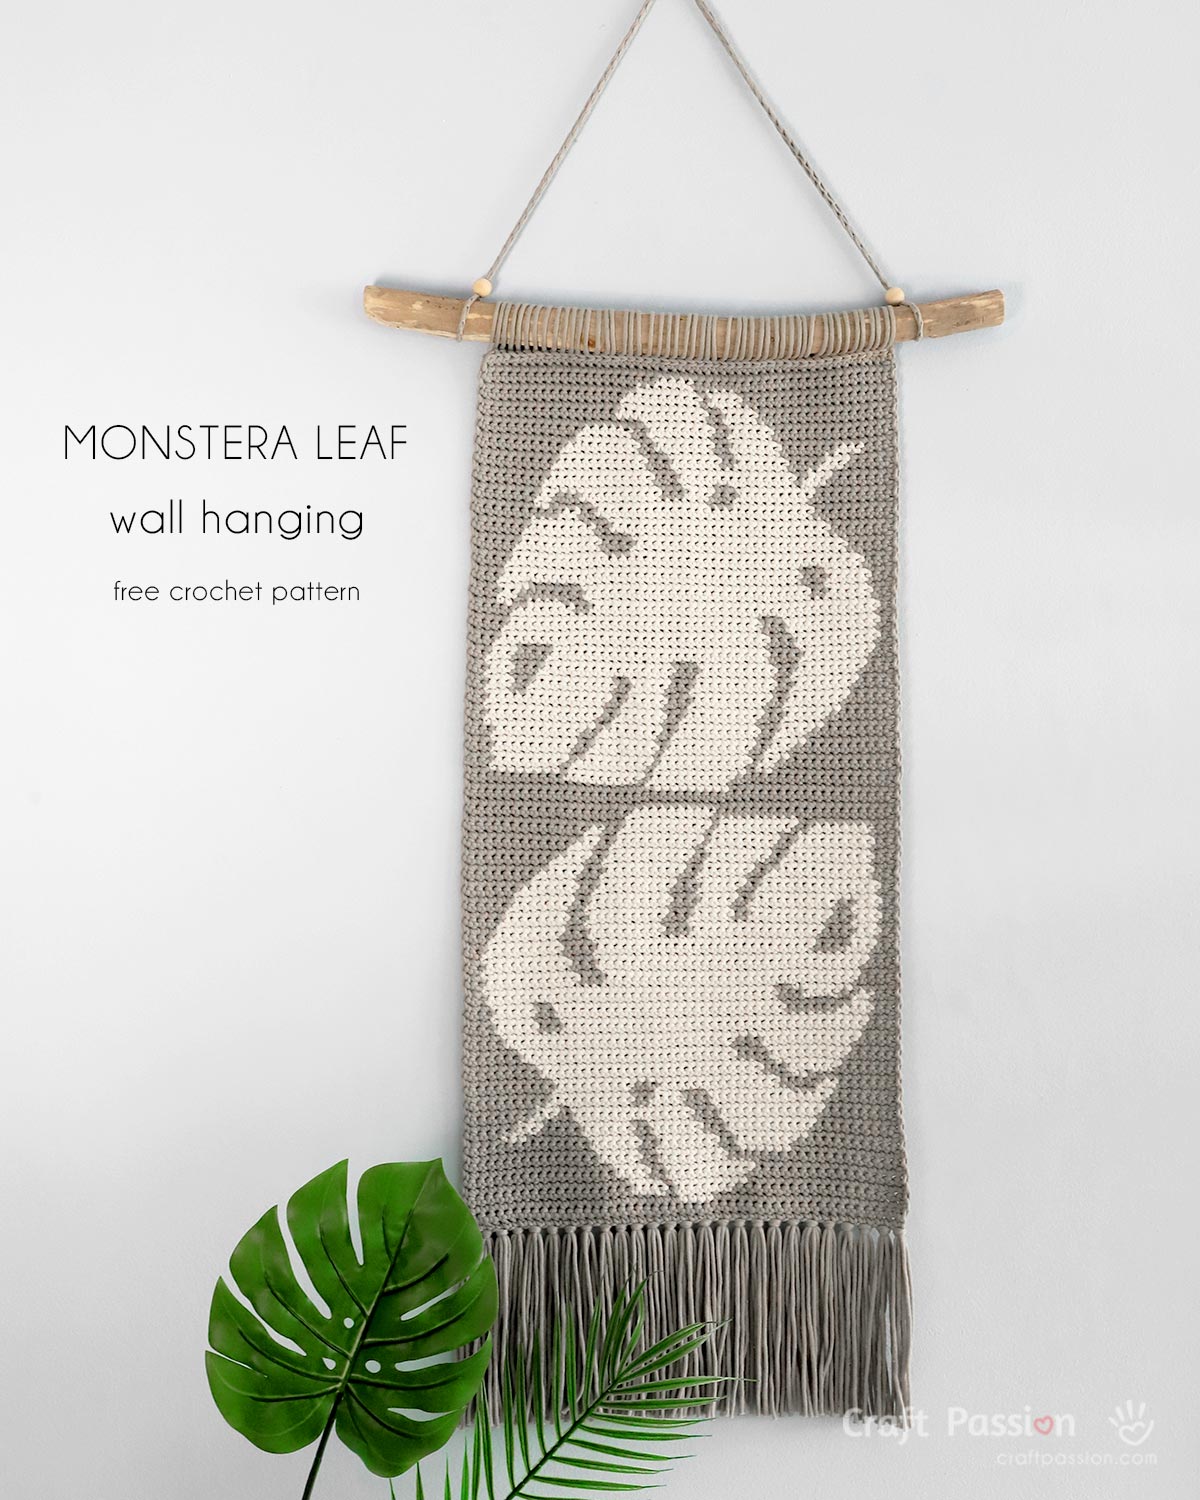 Create a stunning Monstera Leaf crochet wall hanging with our free crochet pattern & tutorial to add a touch of bohemian-inspired modern designs to your home decor.